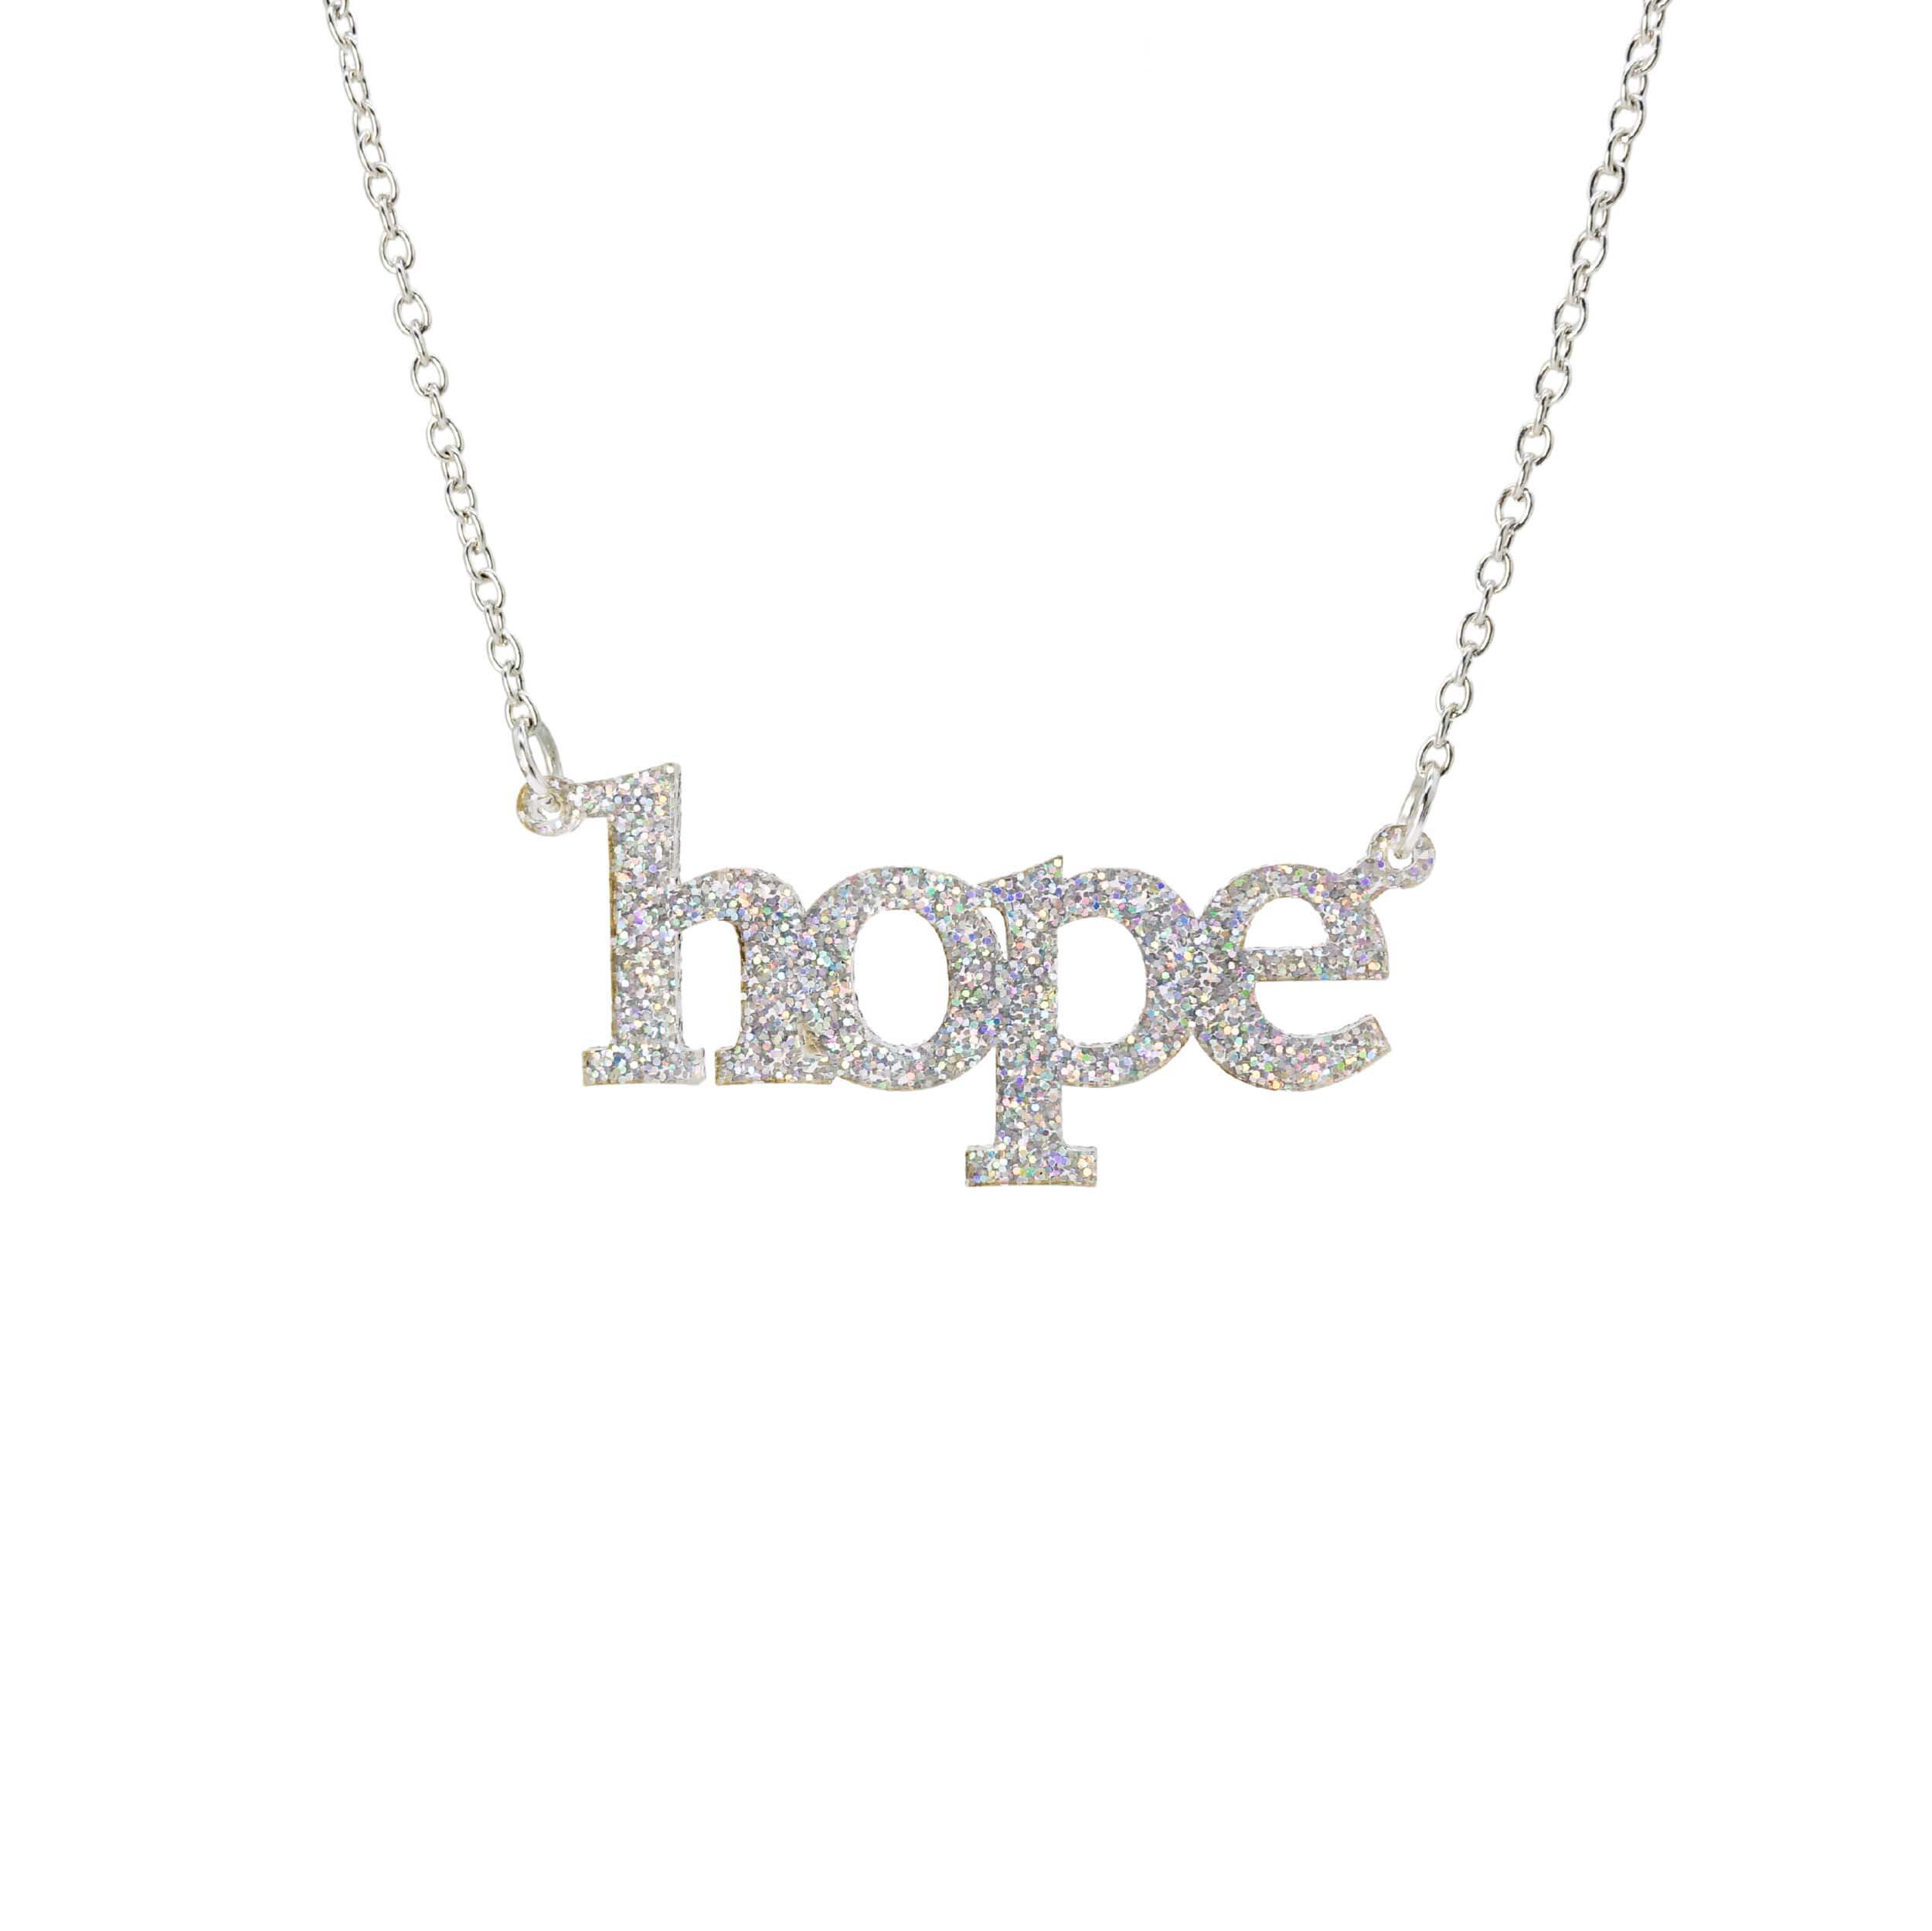 Hope necklace in silver glitter shown on a silver chain hanging on a white background. 